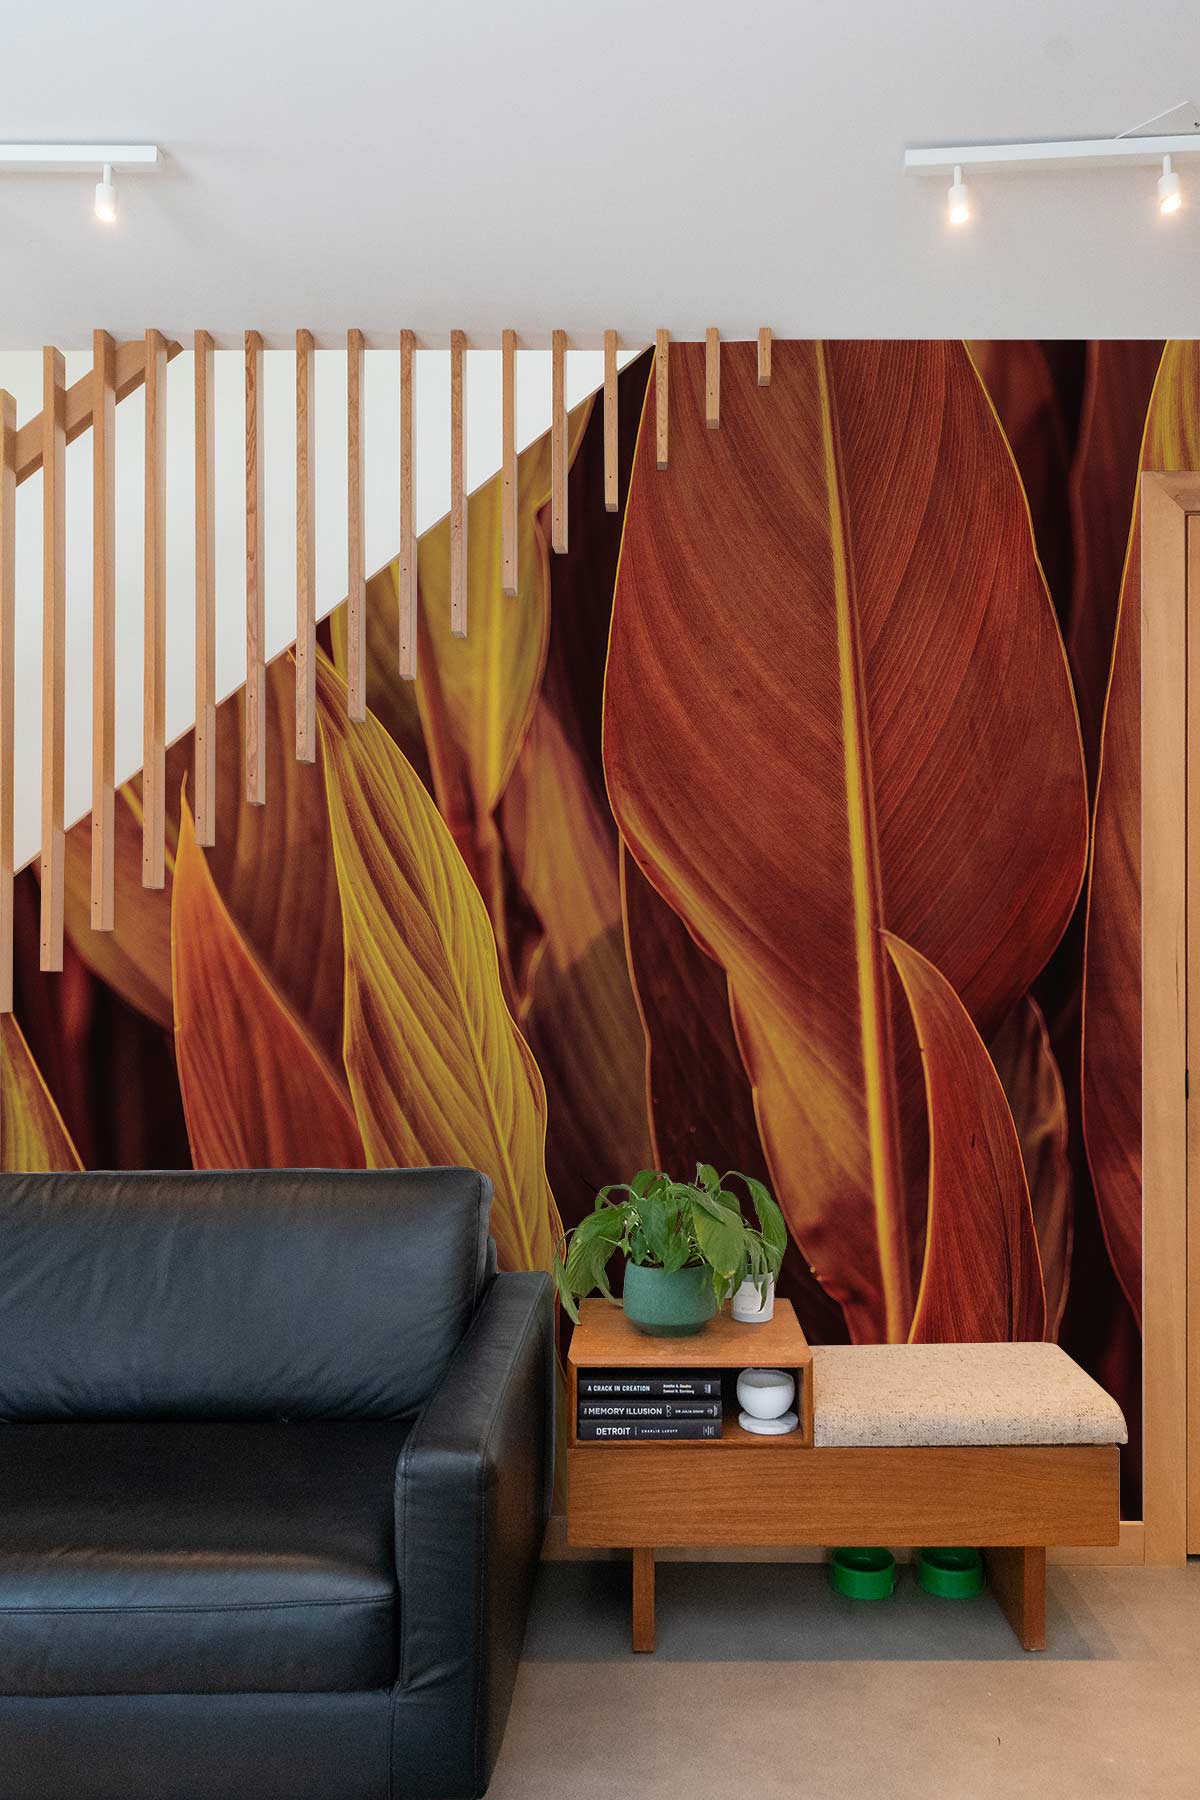 Wallpaper Mural in the Living Room Featuring Orange and Red Harvest Leaves